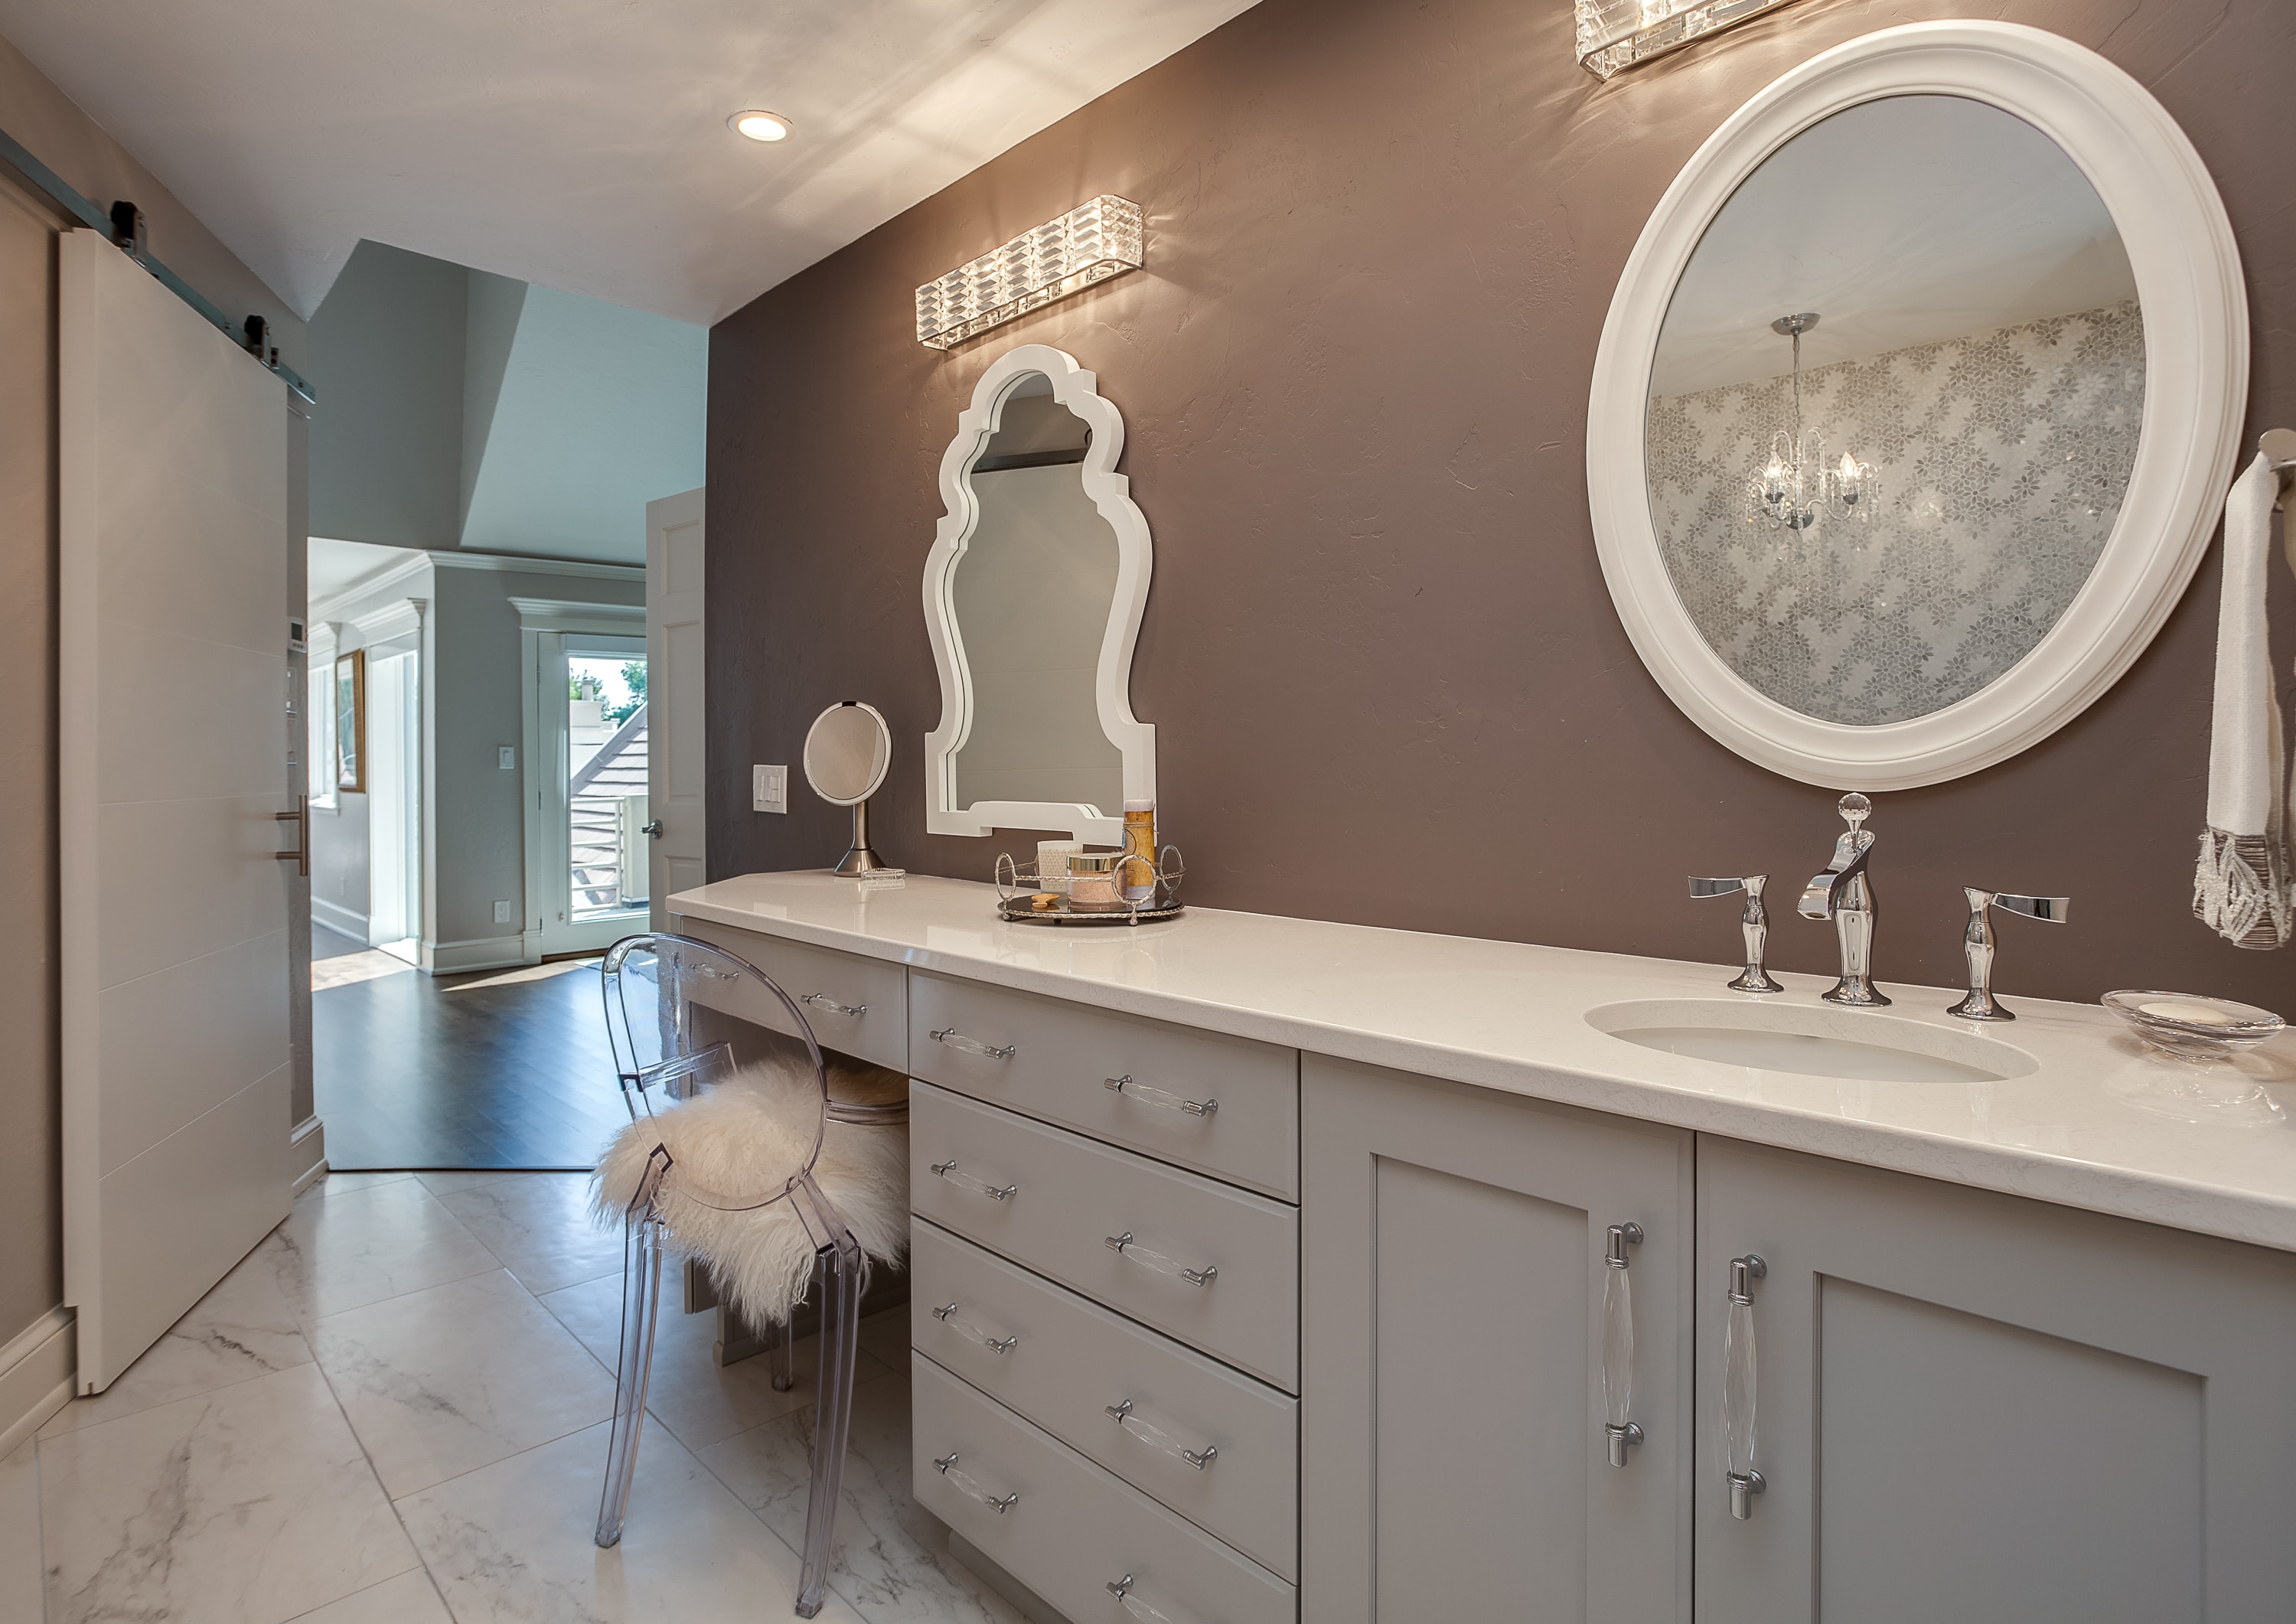 How To Prepare For A Bathroom Remodel, Master Bathroom Vanity With Makeup Area